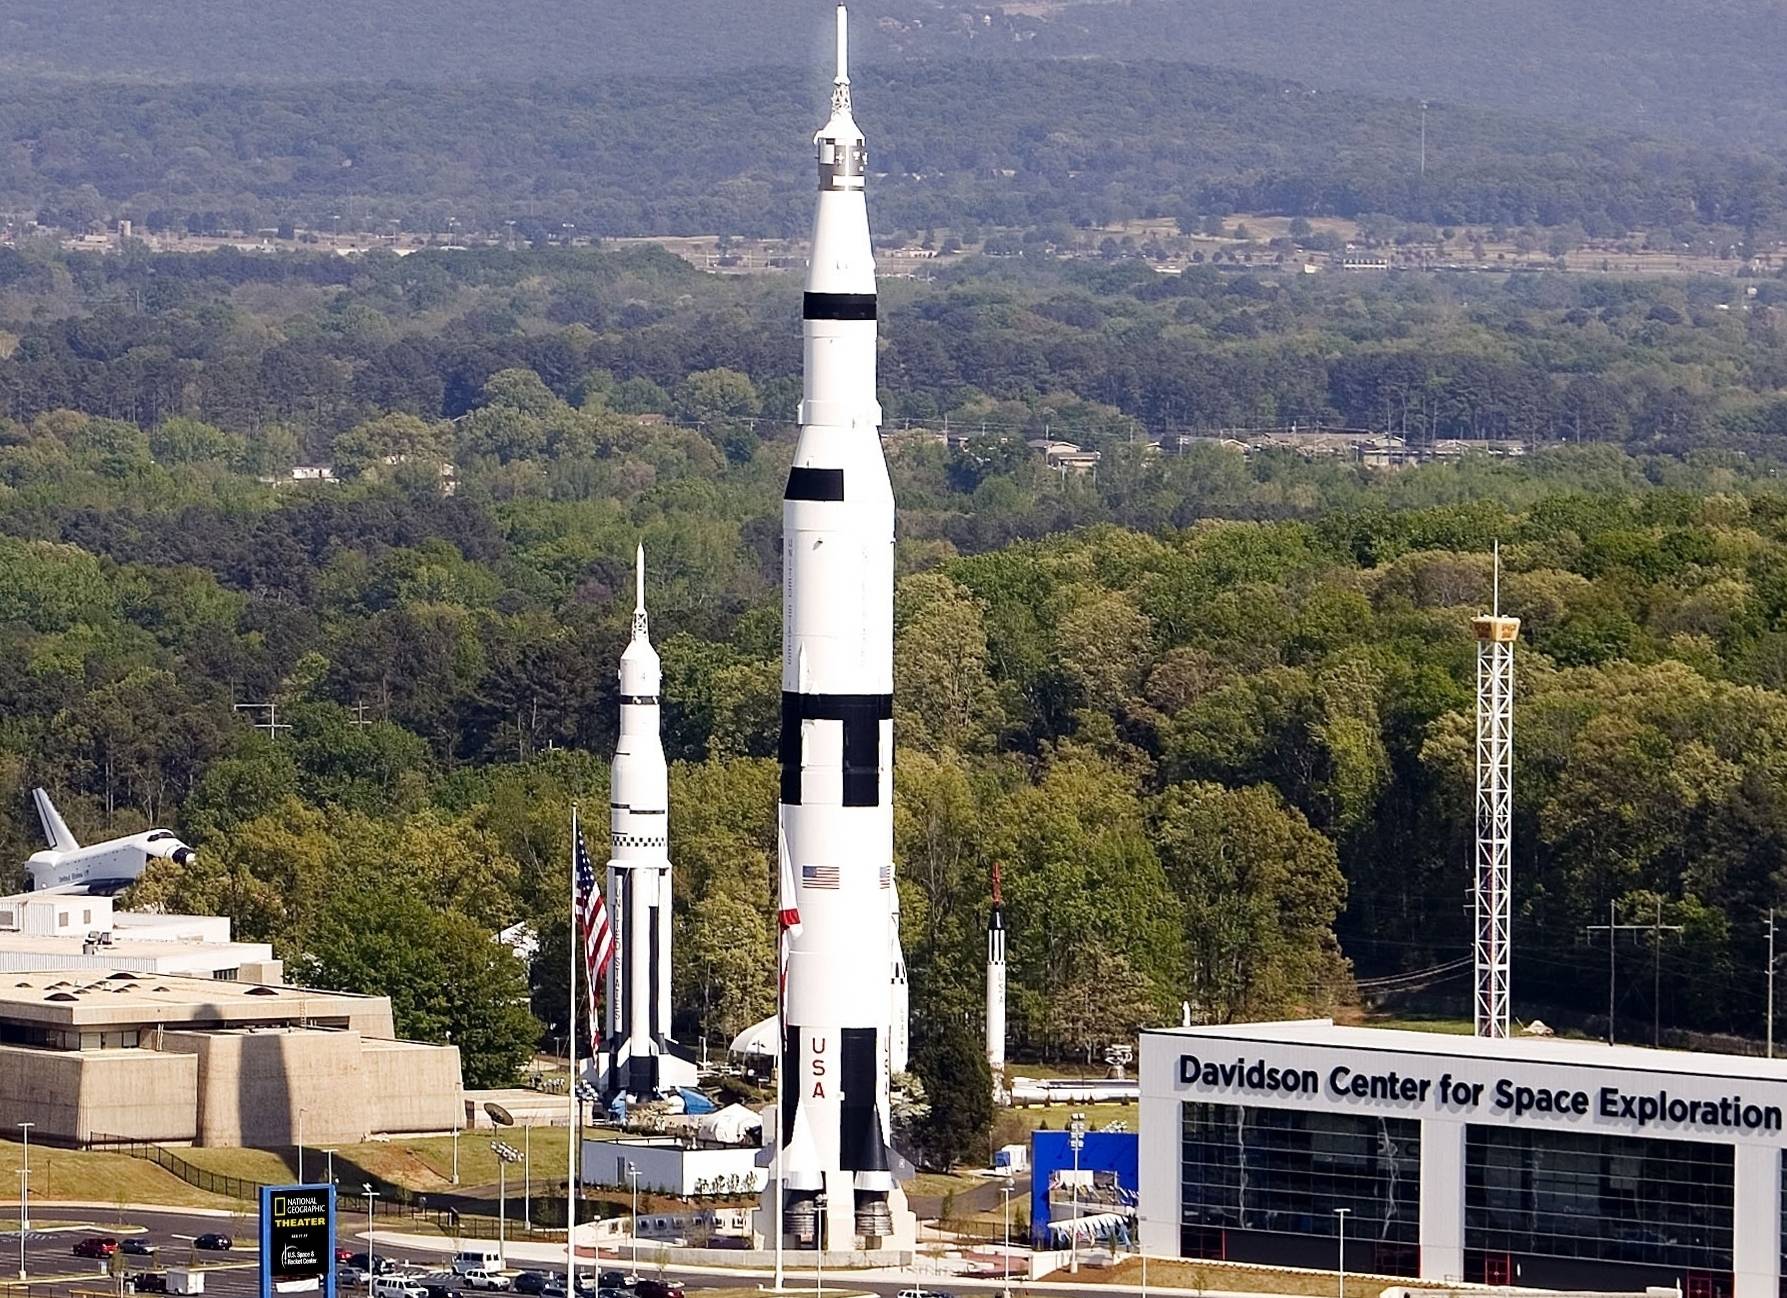 US Space and Rocket center